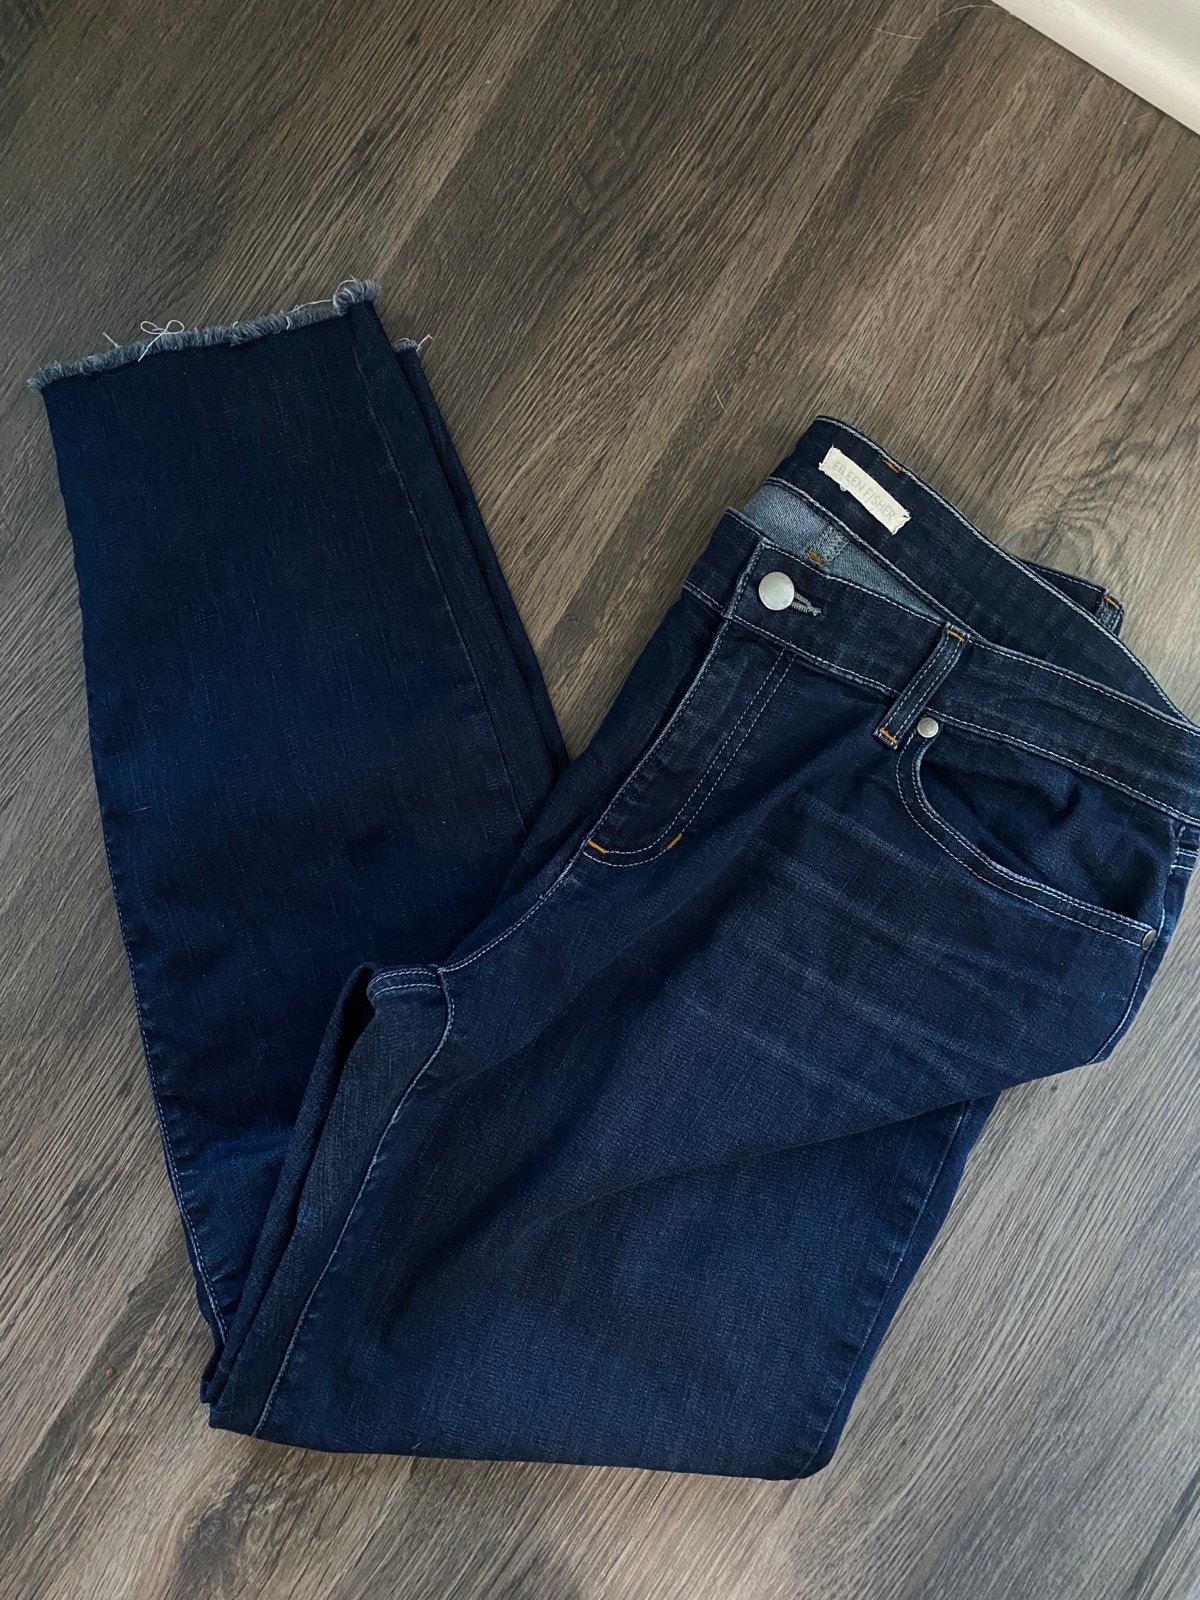 large selection Eileen Fisher Jeans laLPcdbdx Discount